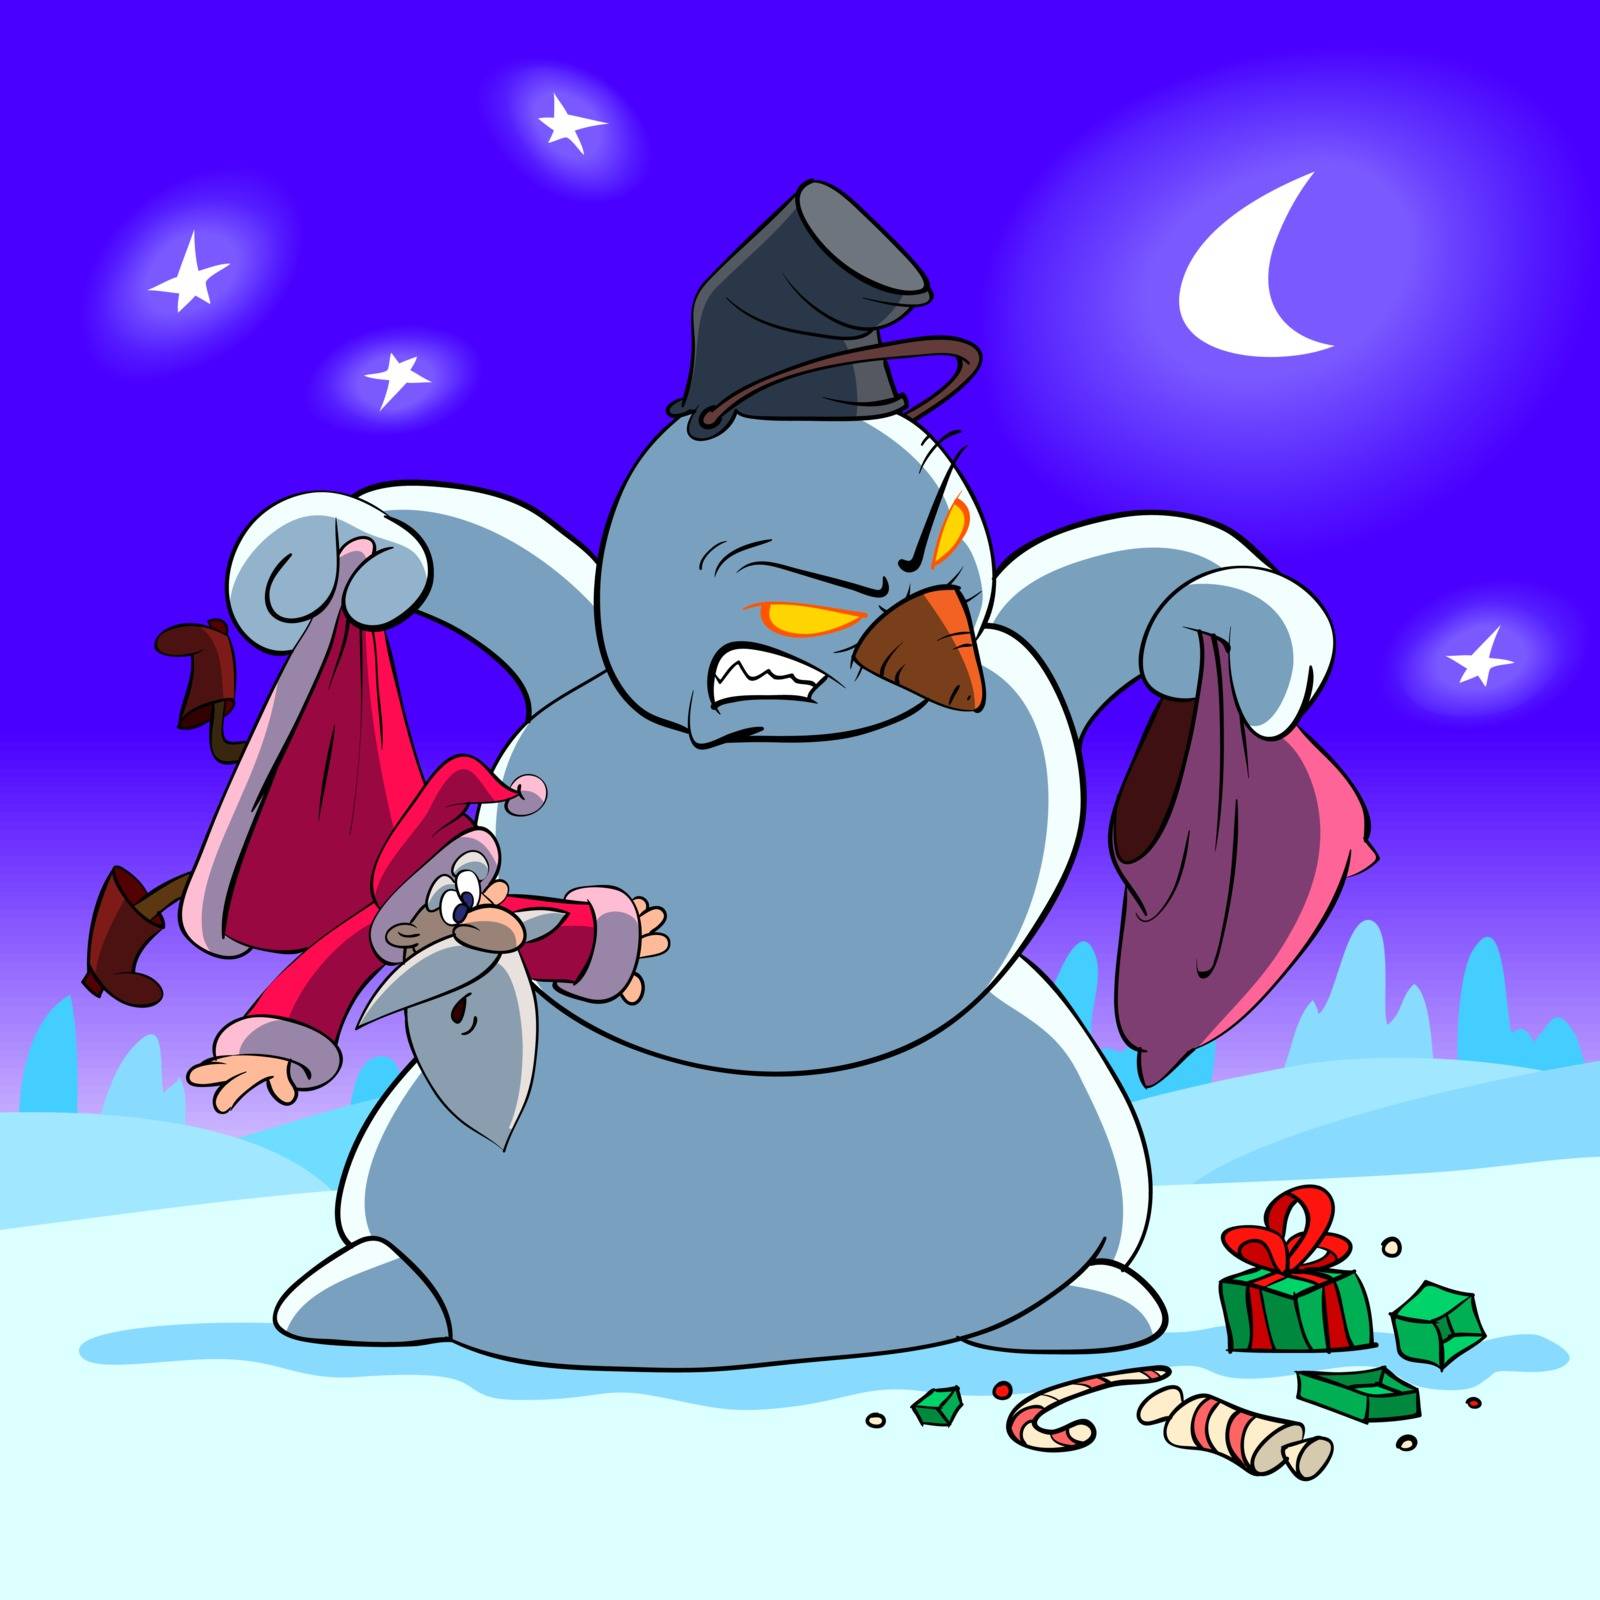 Angry Snowman ask to Santa Claus where is his gift